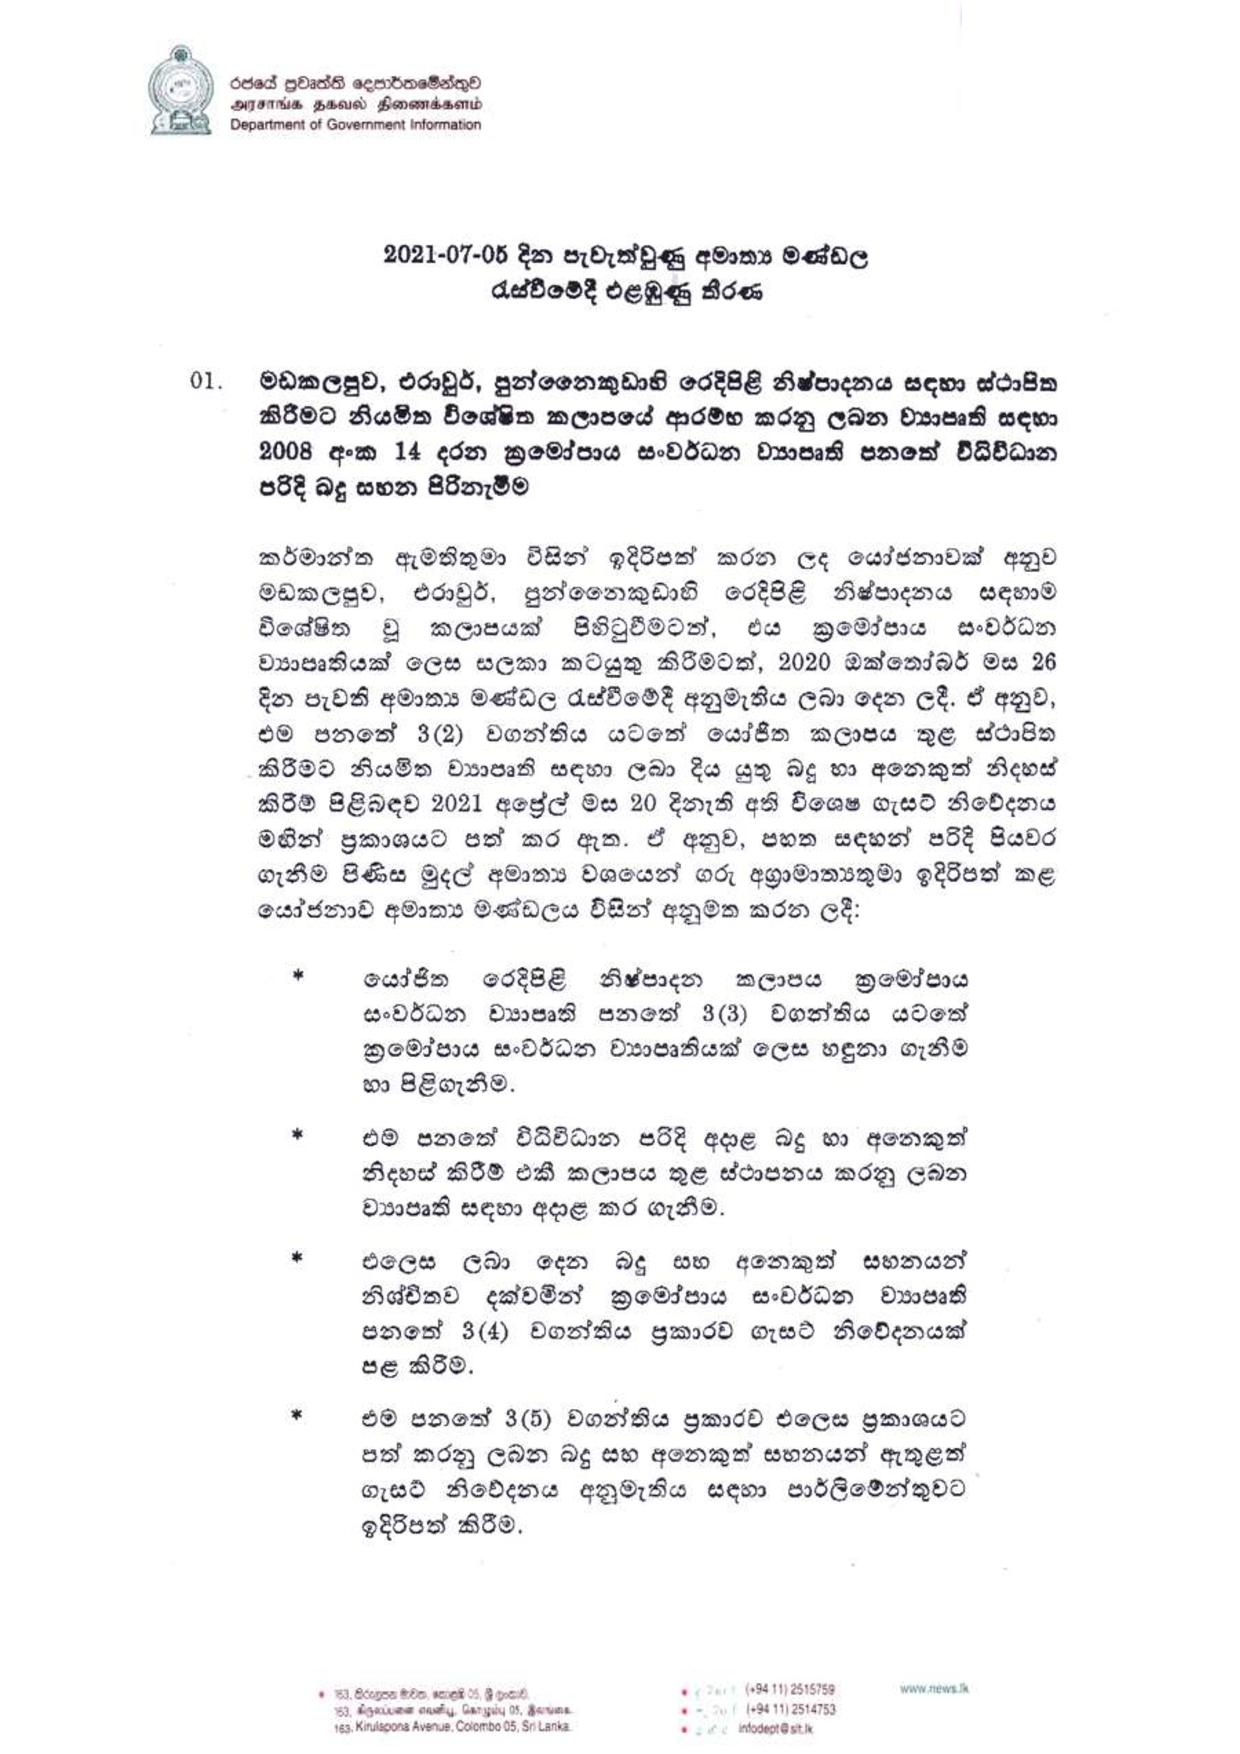 Cabinet Decision on 05.07.2021 page 001